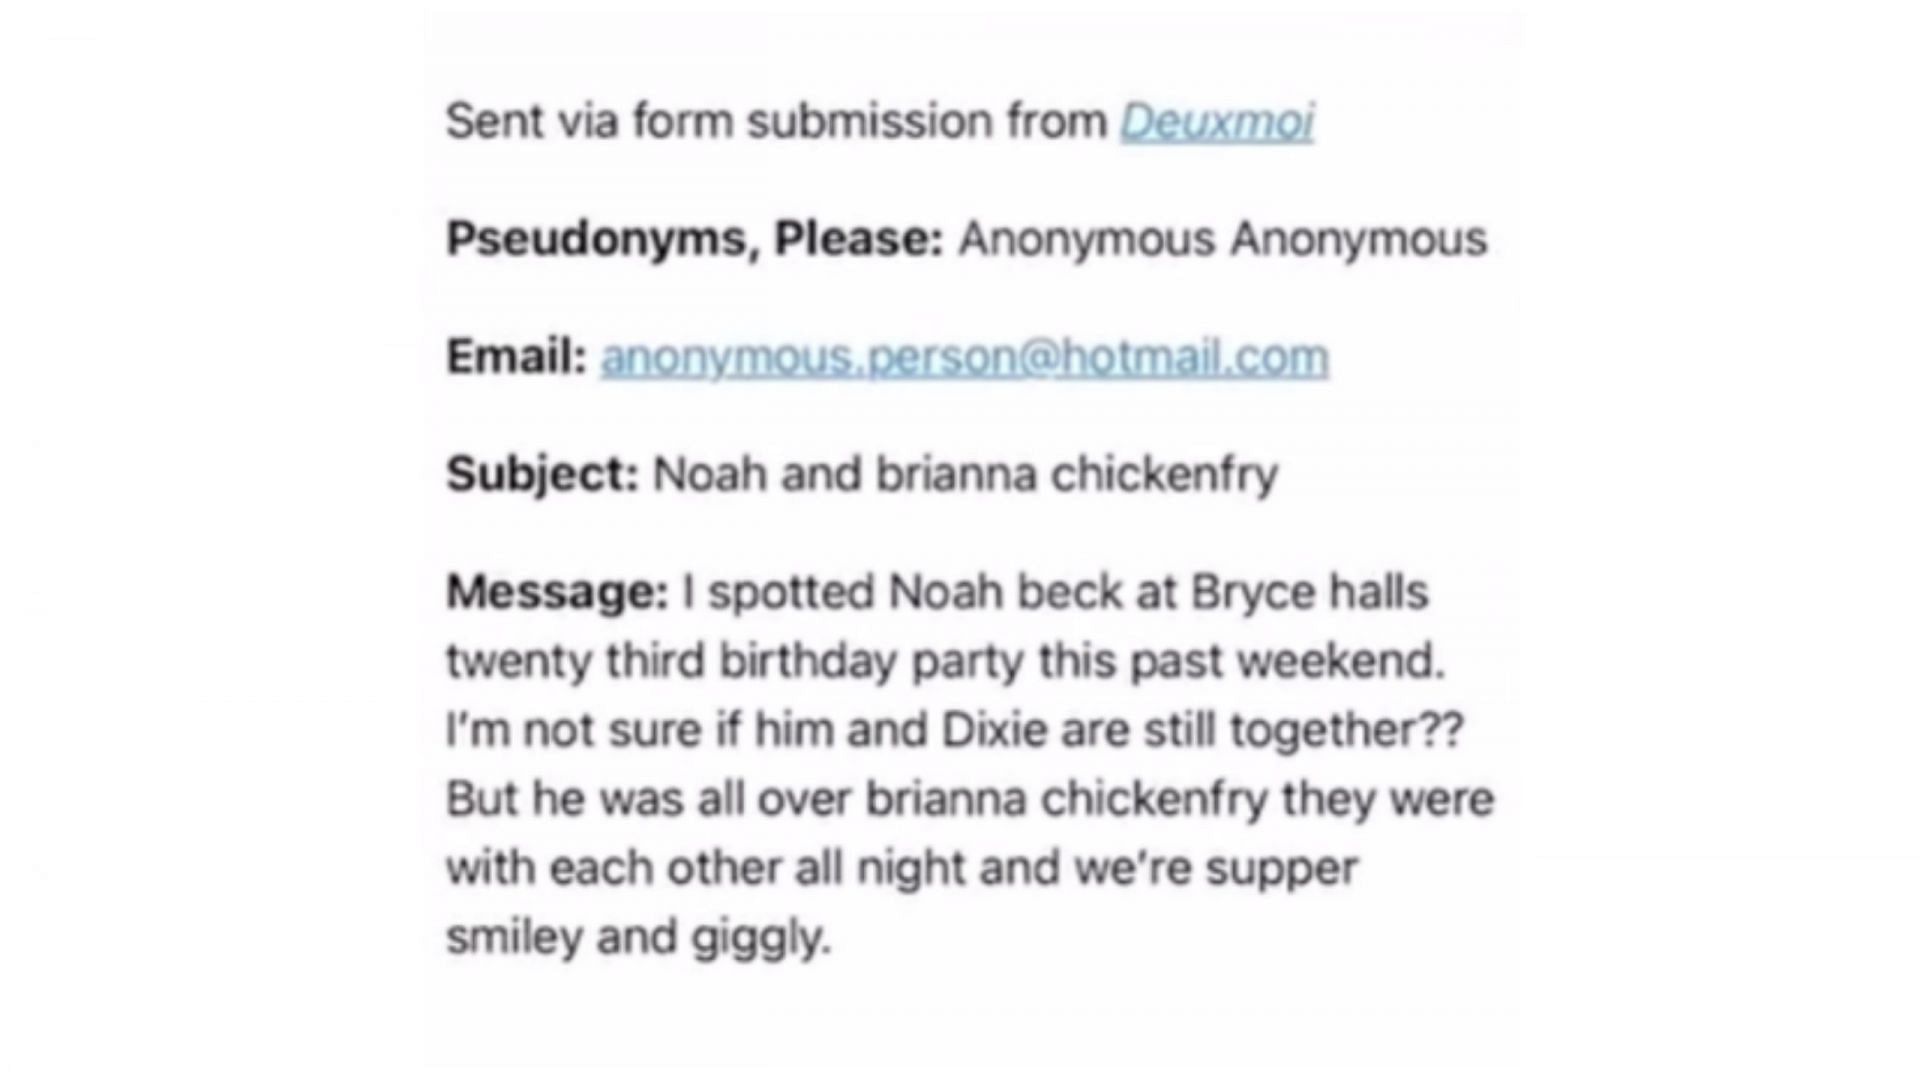 Claims made by Deuxmoi regarding Noah Beck and Brianna Chickenfry (Image via BFFS/YouTube)